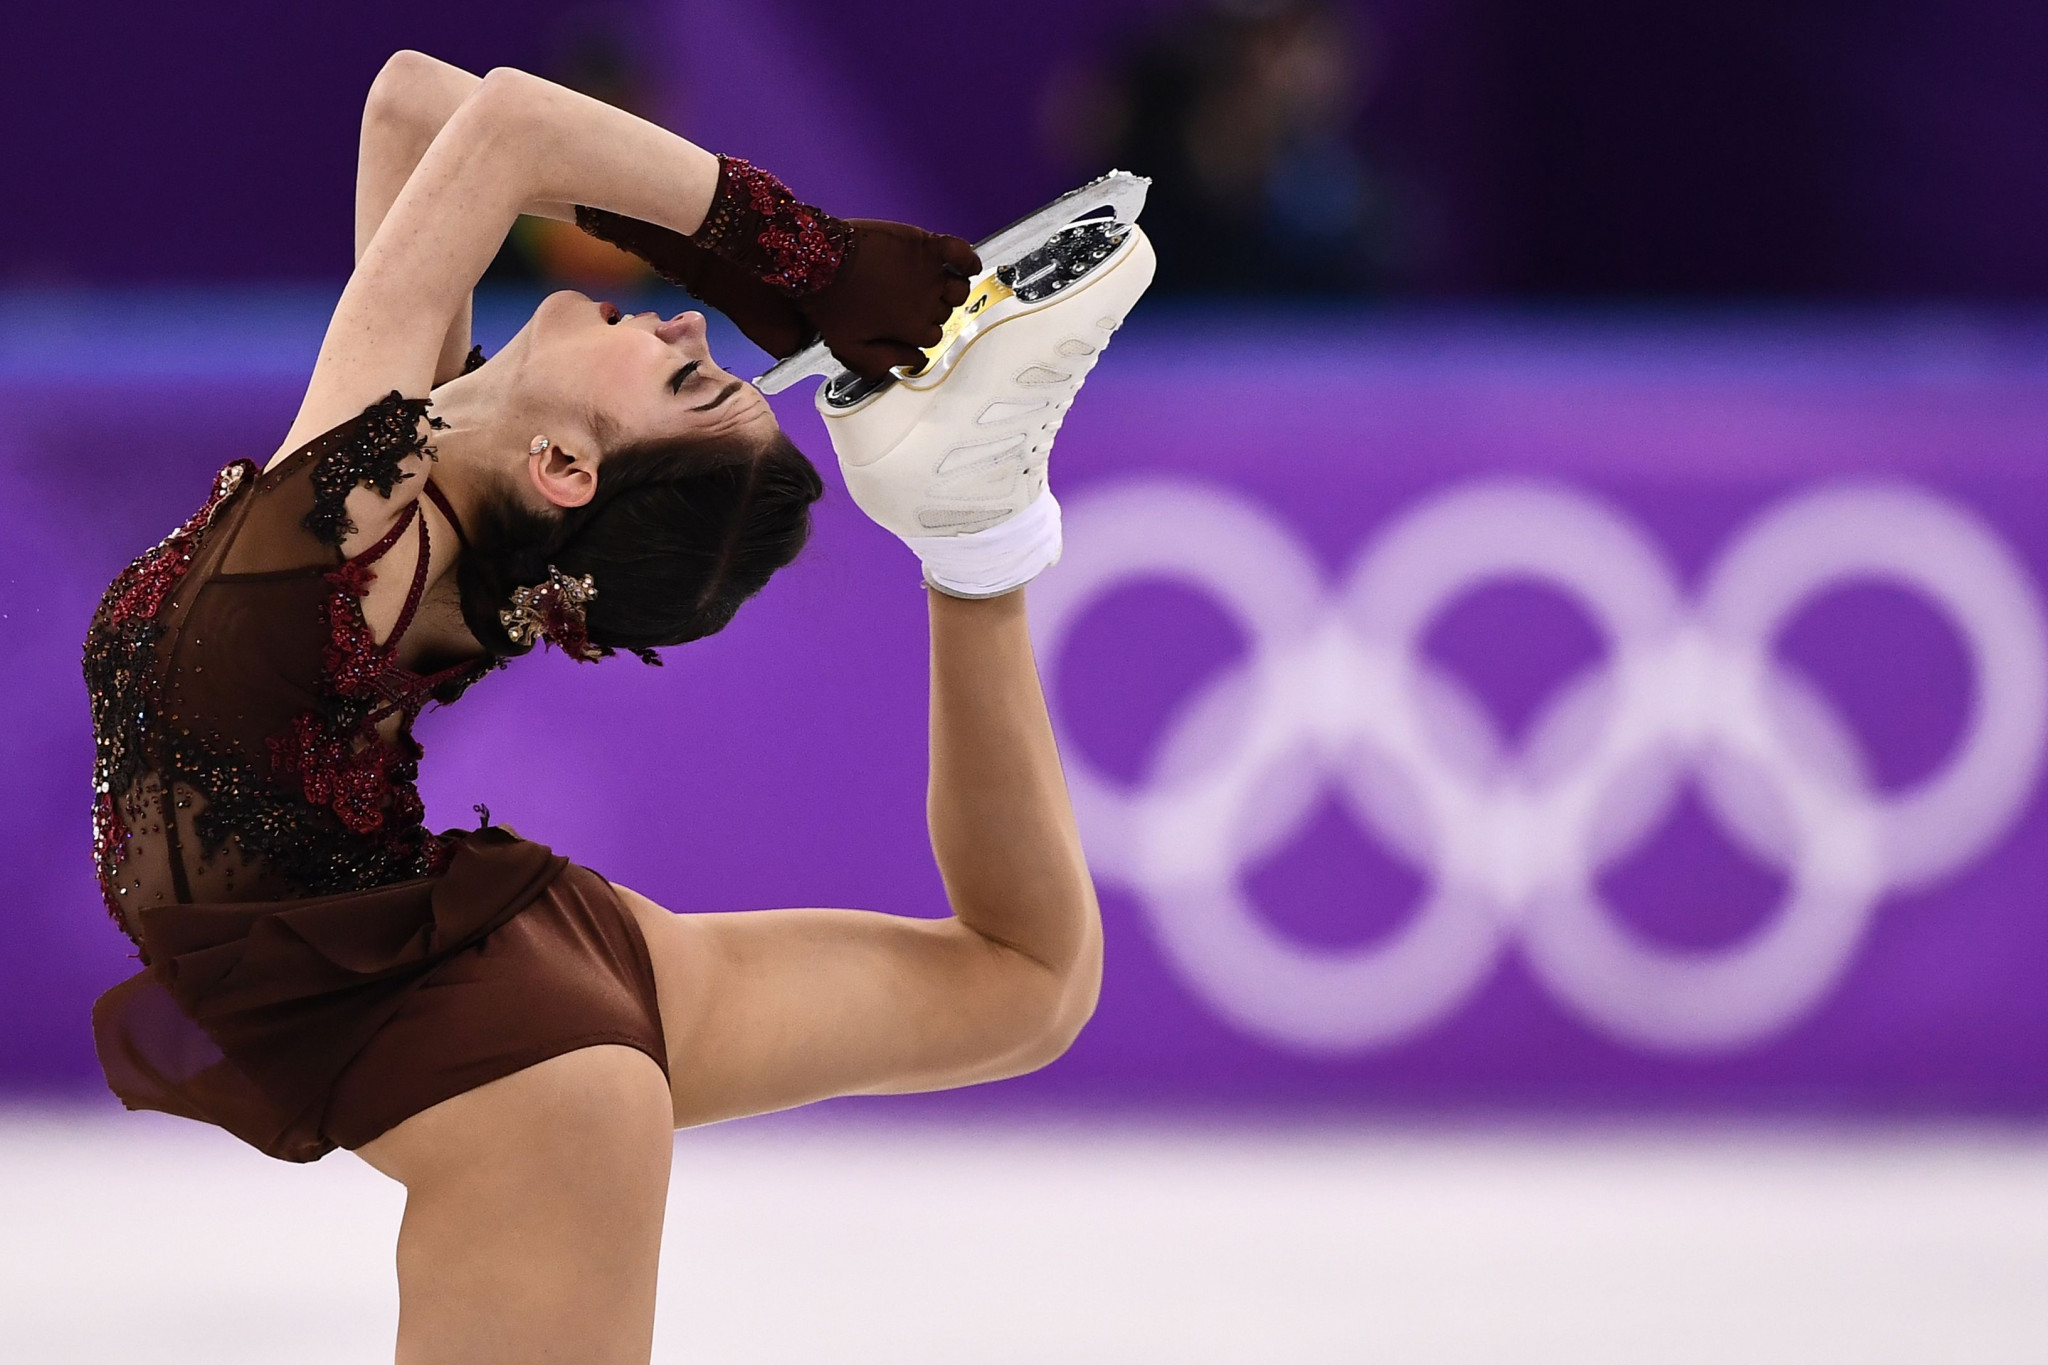 Medvedeva's coach learned about skater's decision to leave on television